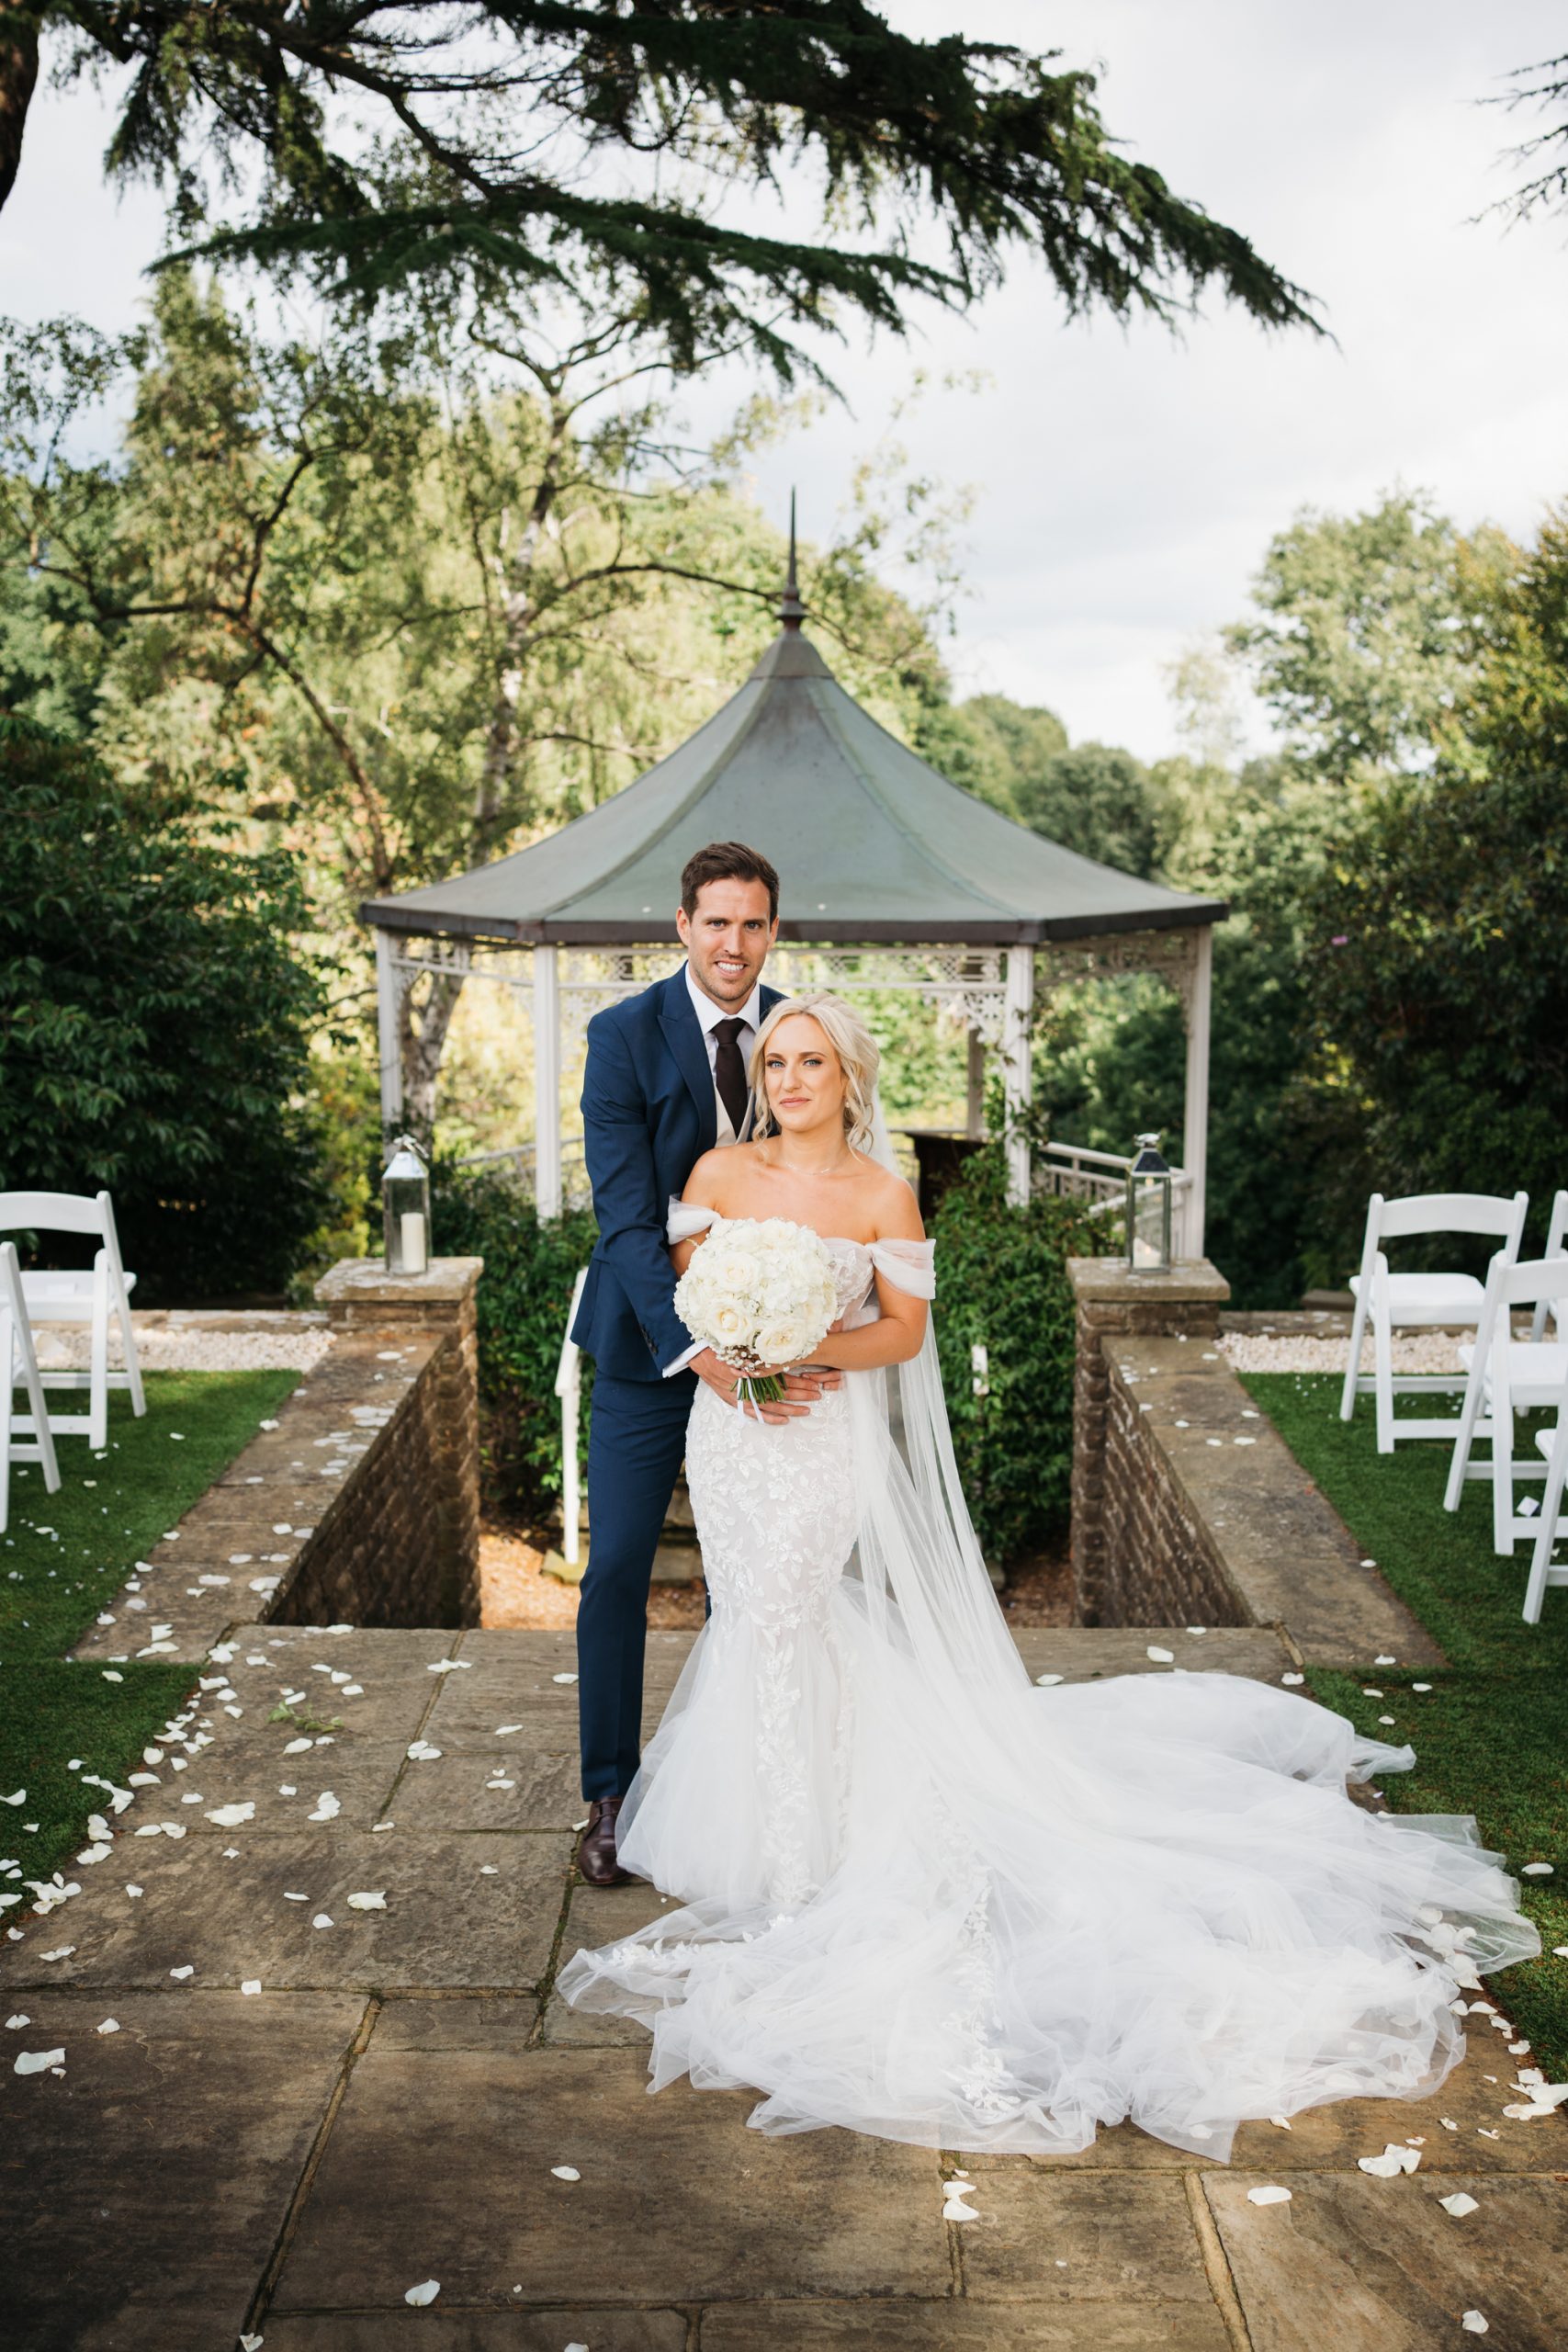 Pennyhill Park recommended wedding photographers